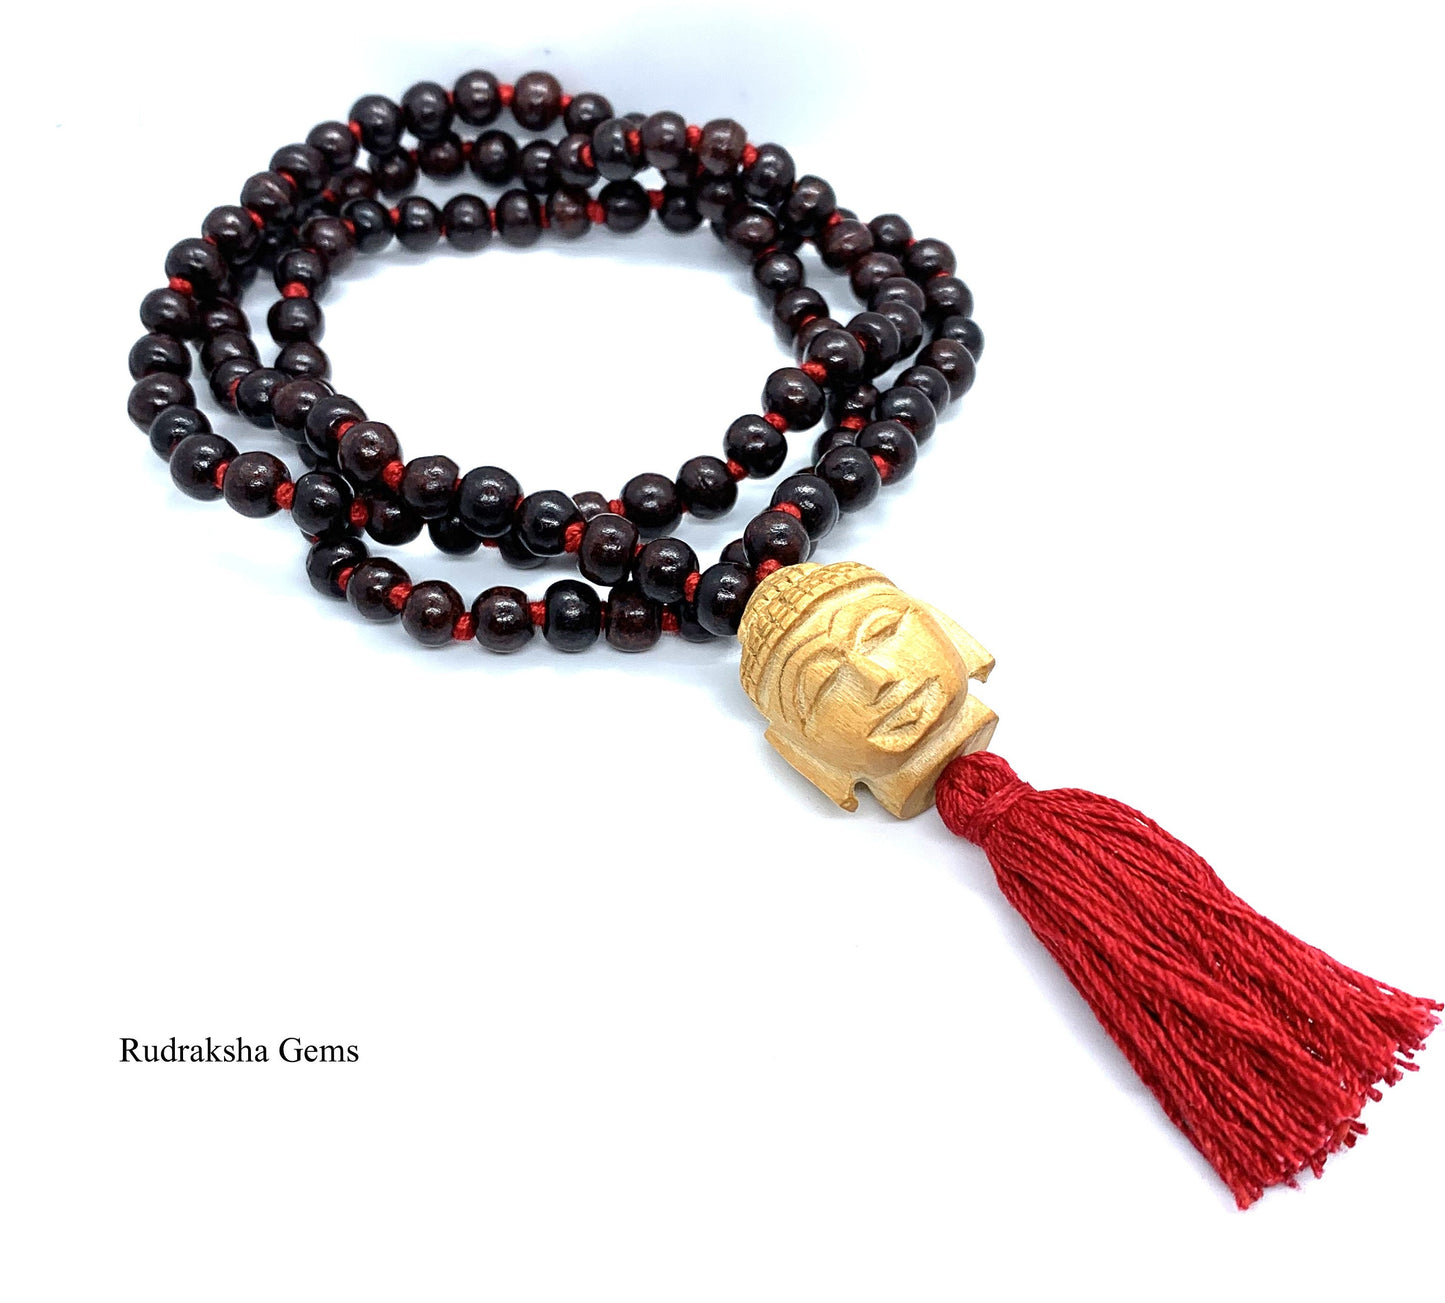 Buddha Classic 108 Knotted Meditation Mala | 8mm Indian Rosewood with Red / Cotton String Tassel | Elegant Natural Design | Yoga Necklace